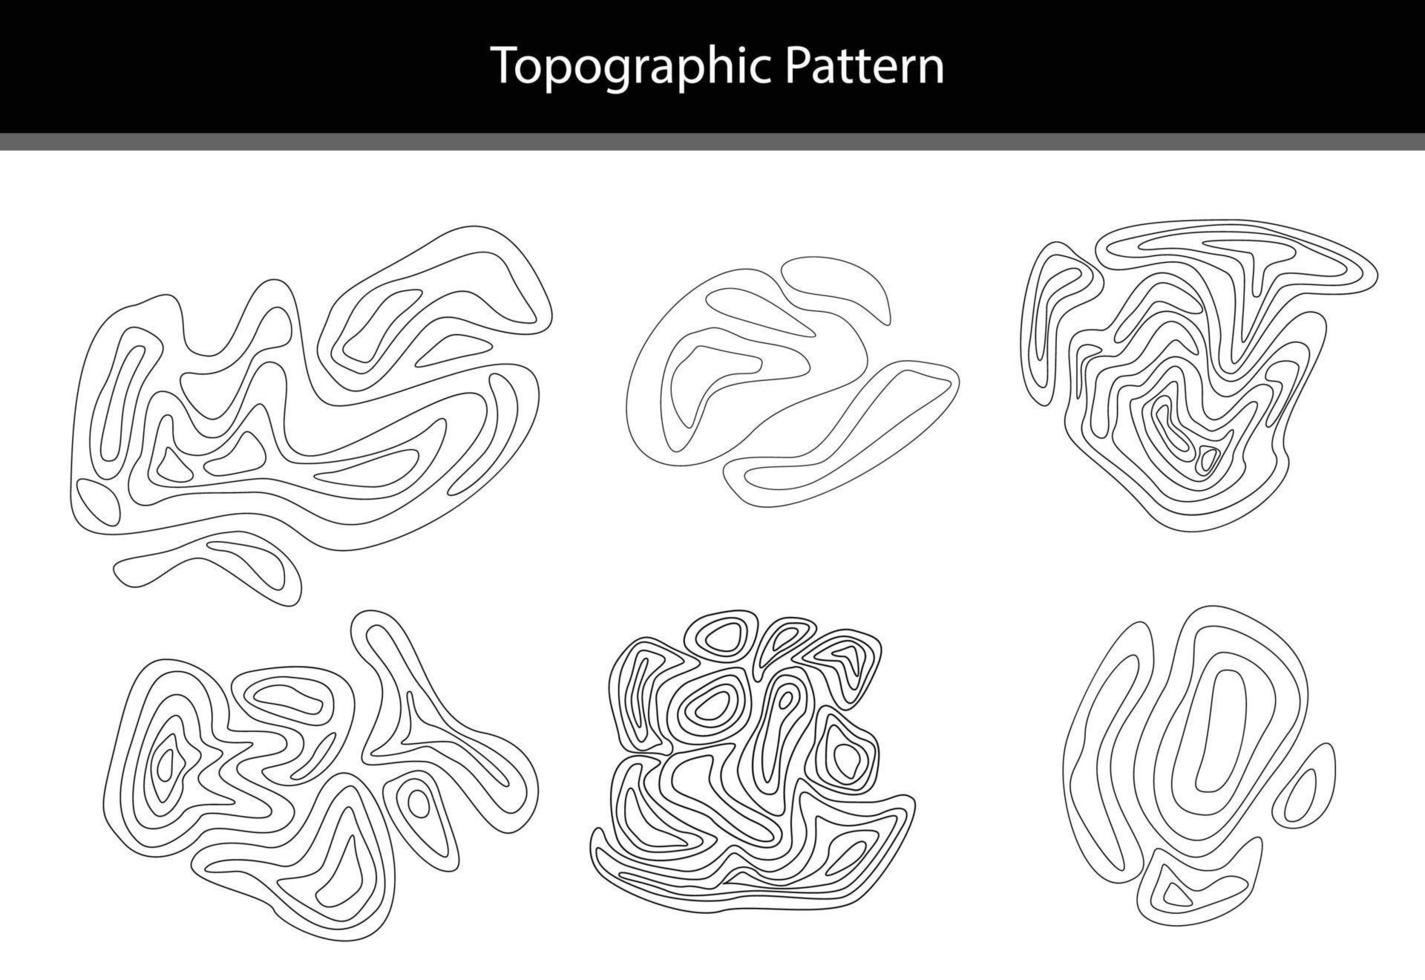 Topography pattern and geography map , Abstract   Line, Vector illustration